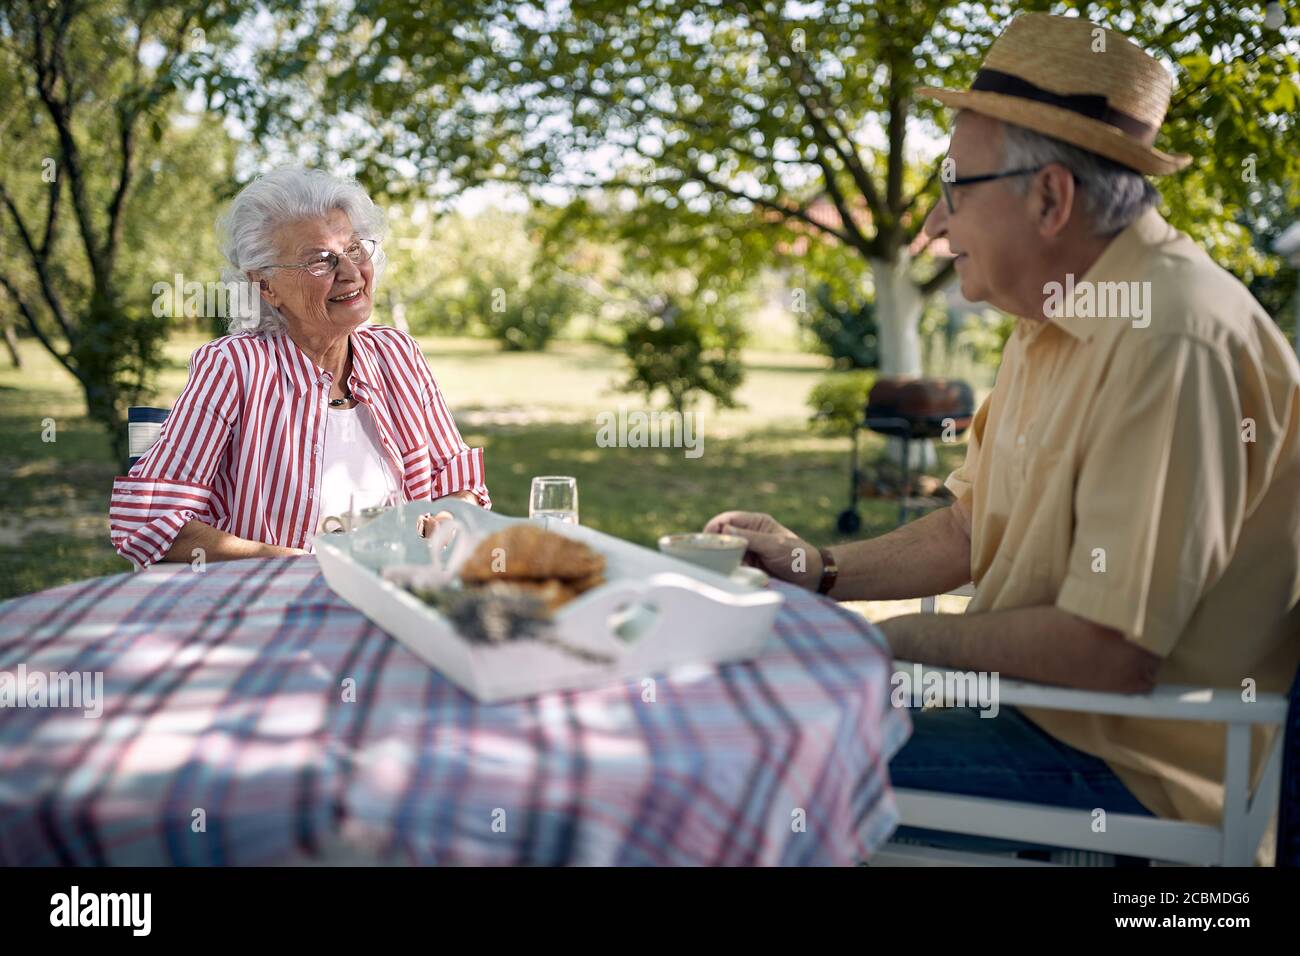 Smiling Senior Woman and Men enjoying together outdoor and drink coffee. Stock Photo